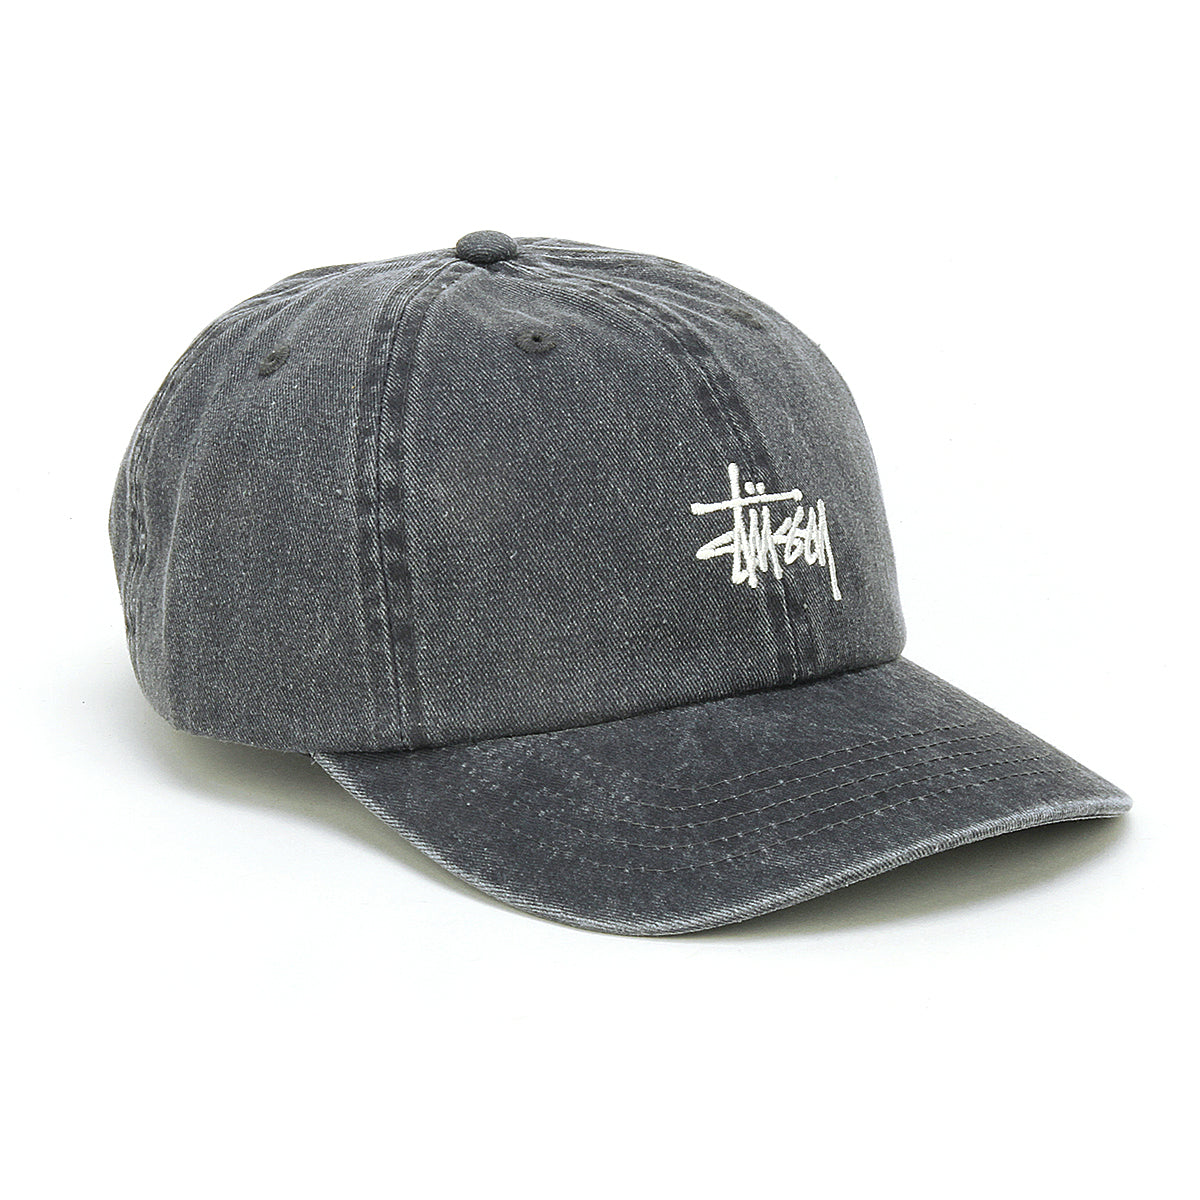 Stussy | Washed Basic Low Pro Cap Style # 1311118 Color : Charcoal